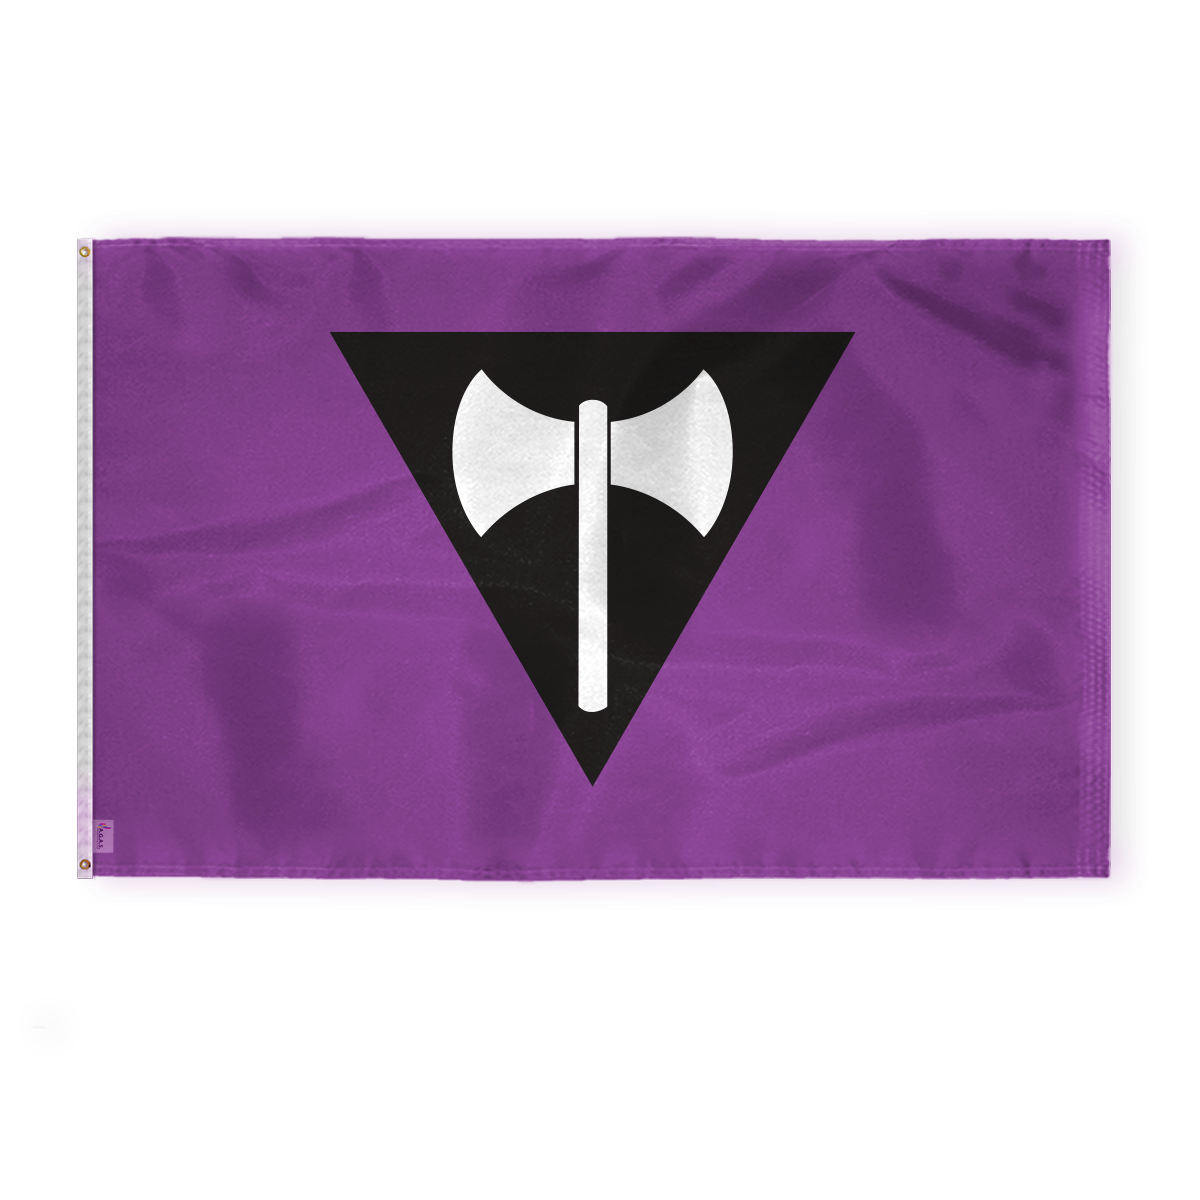 AGAS Large Lesbian Pride Flag 6x10 Ft - Double Sided Printed 200D Nylon